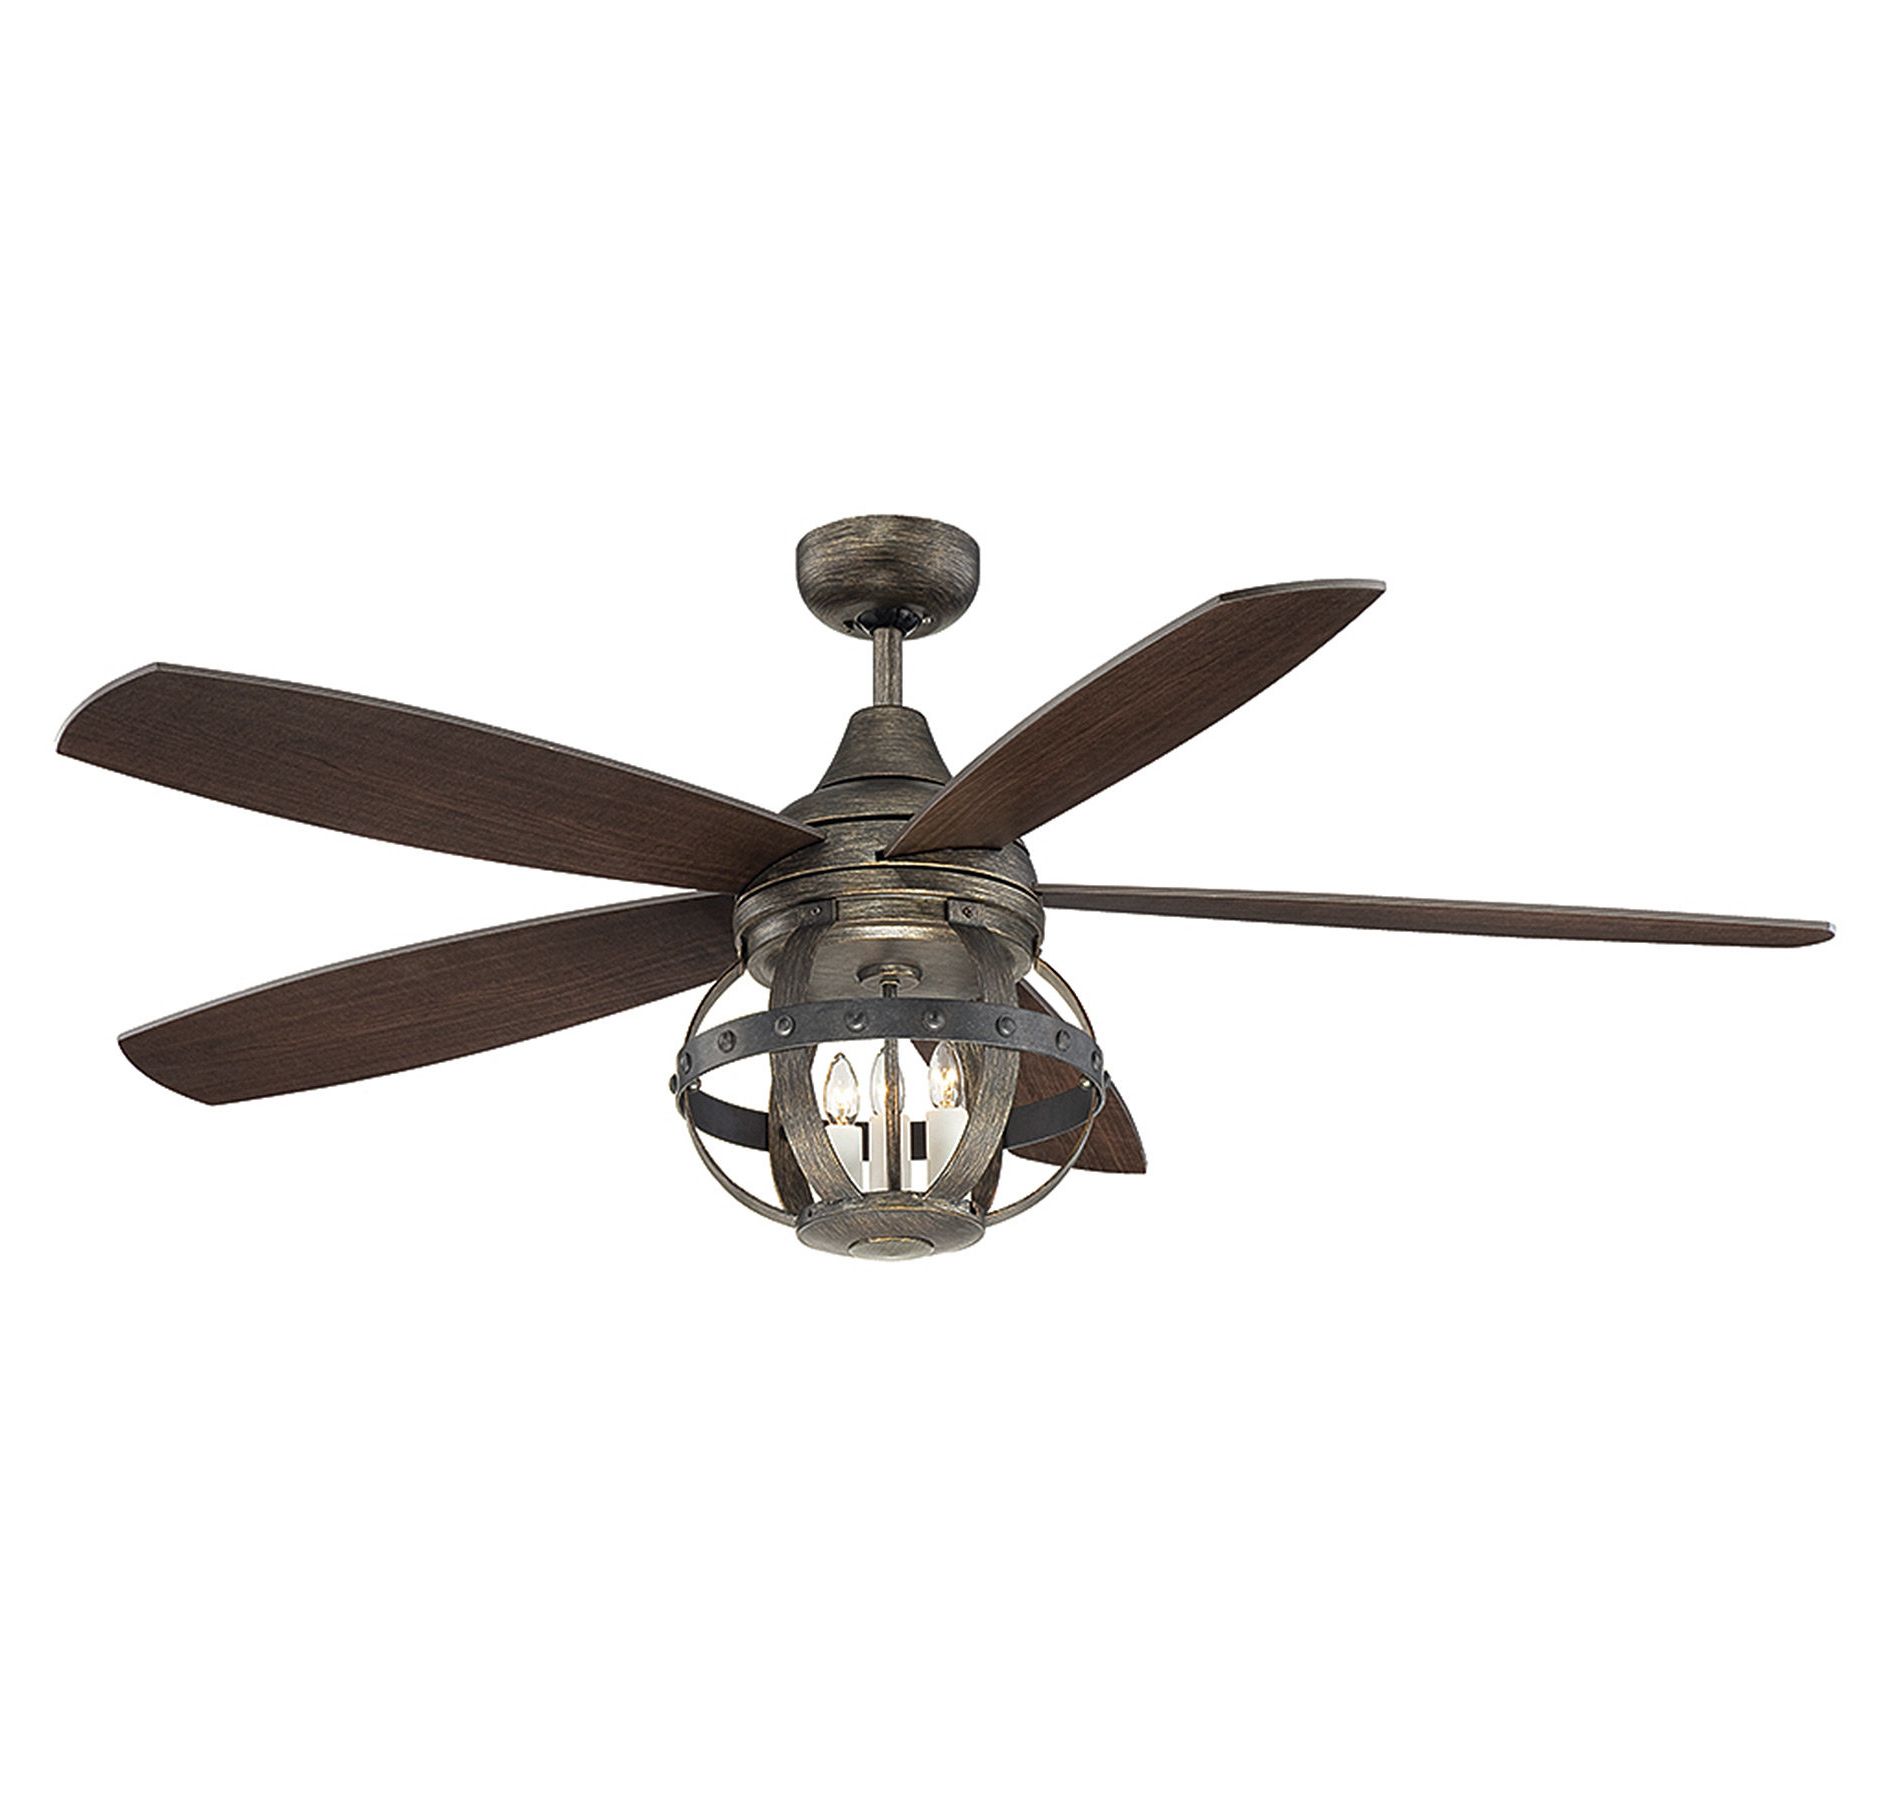 Wilburton 3 Blade Outdoor Ceiling Fans With Most Current 52" Wilburton 5 Blade Ceiling Fan With Remote, Light Kit Included (View 4 of 20)